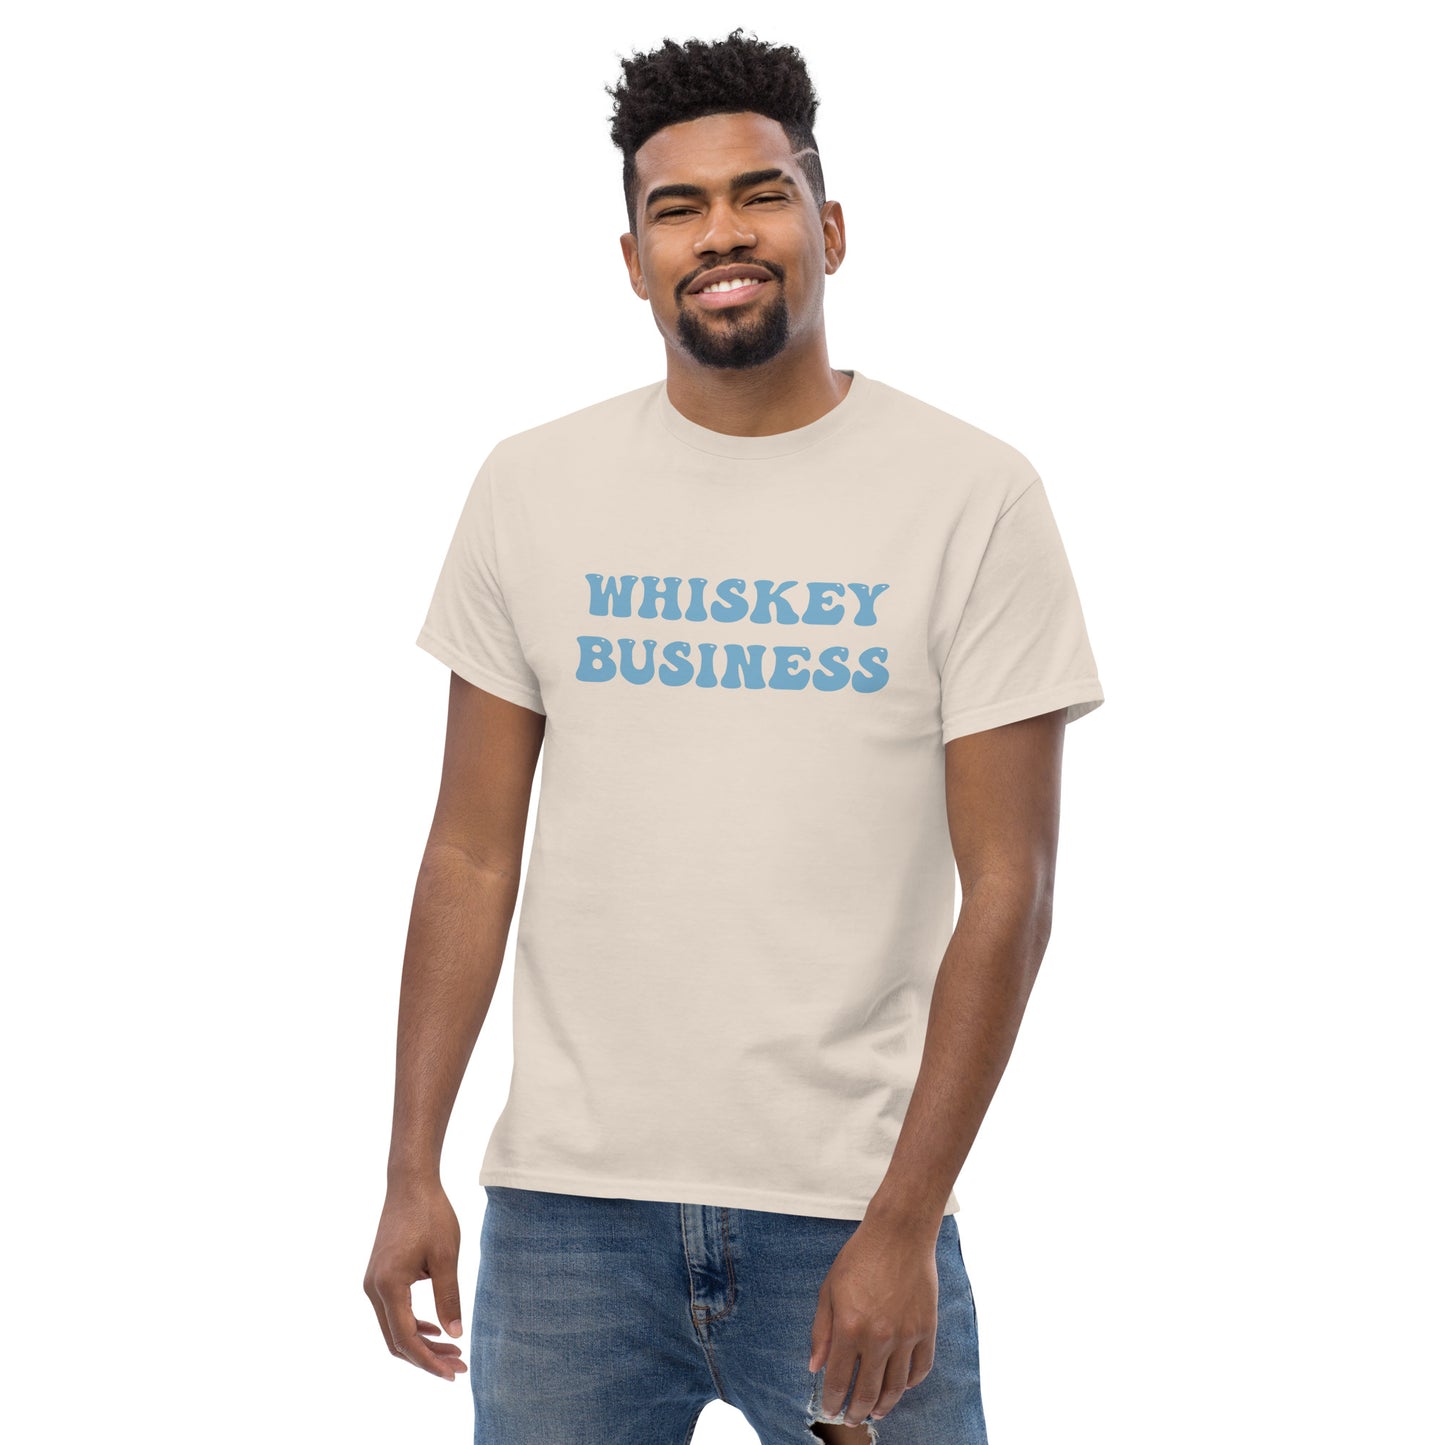 Whiskey Business T-Shirt